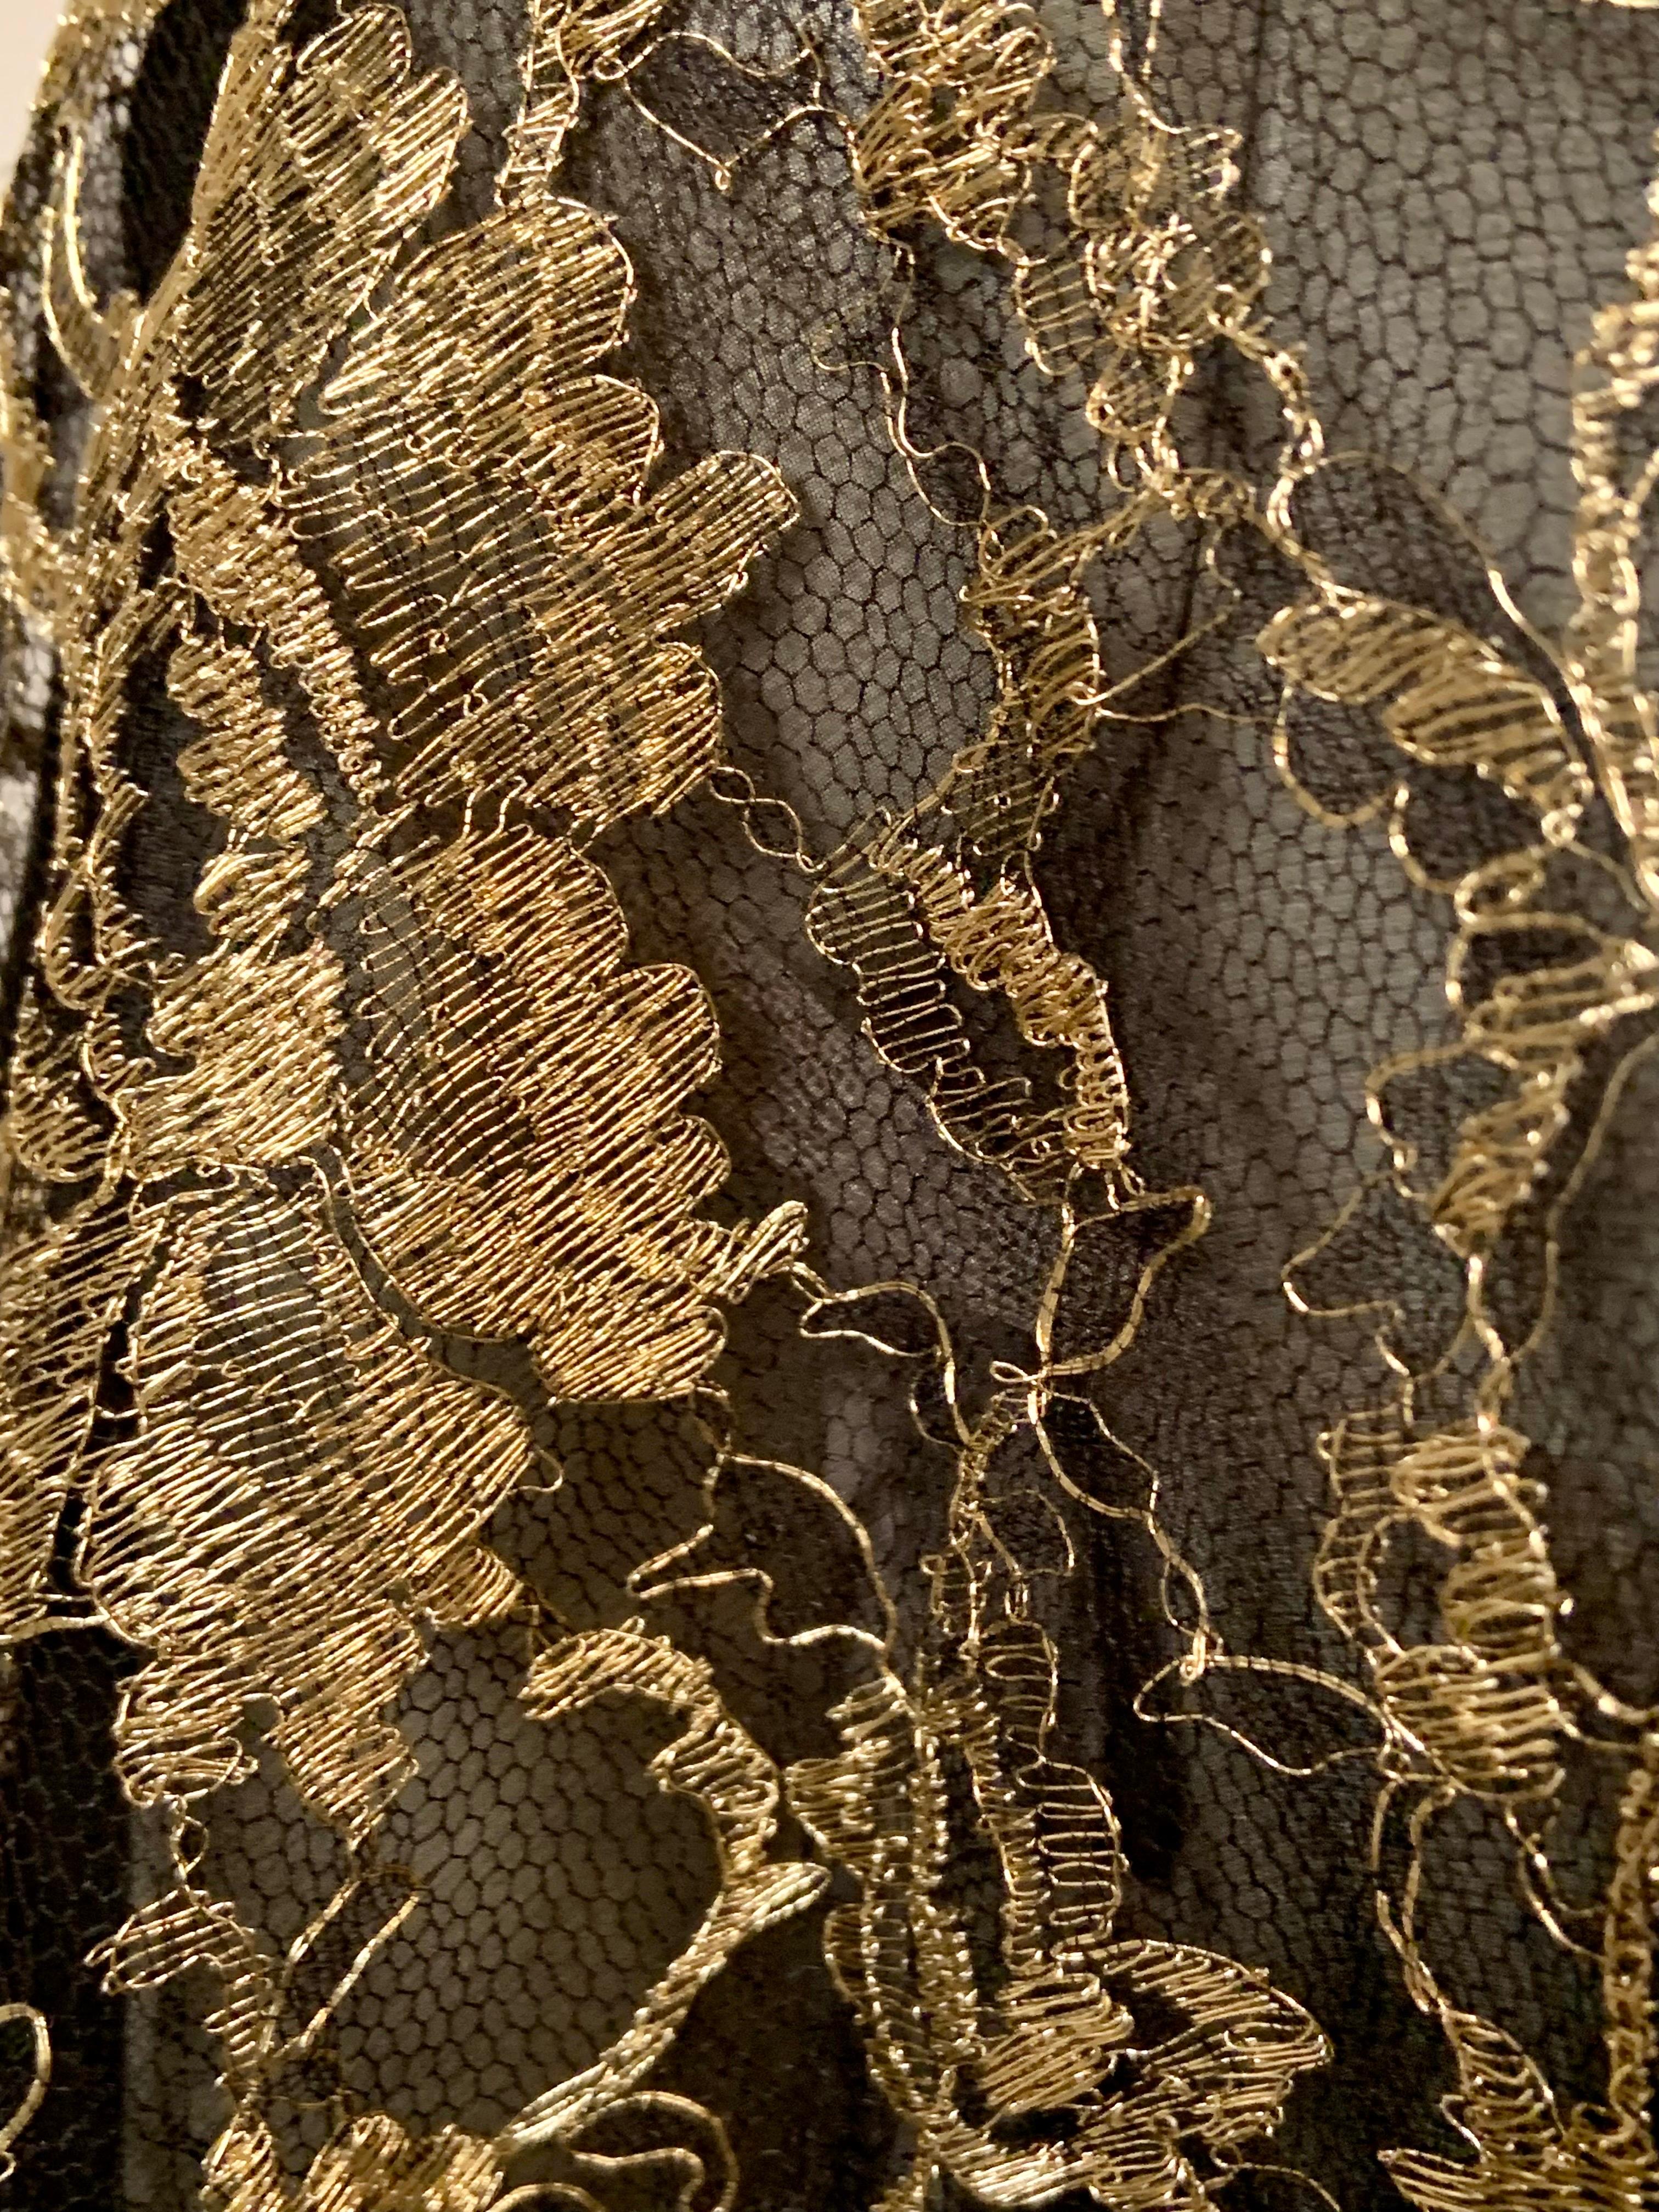 1986 Chanel by Karl Lagerfeld Gold and Black Lace Gown with Train Original Tag For Sale 1